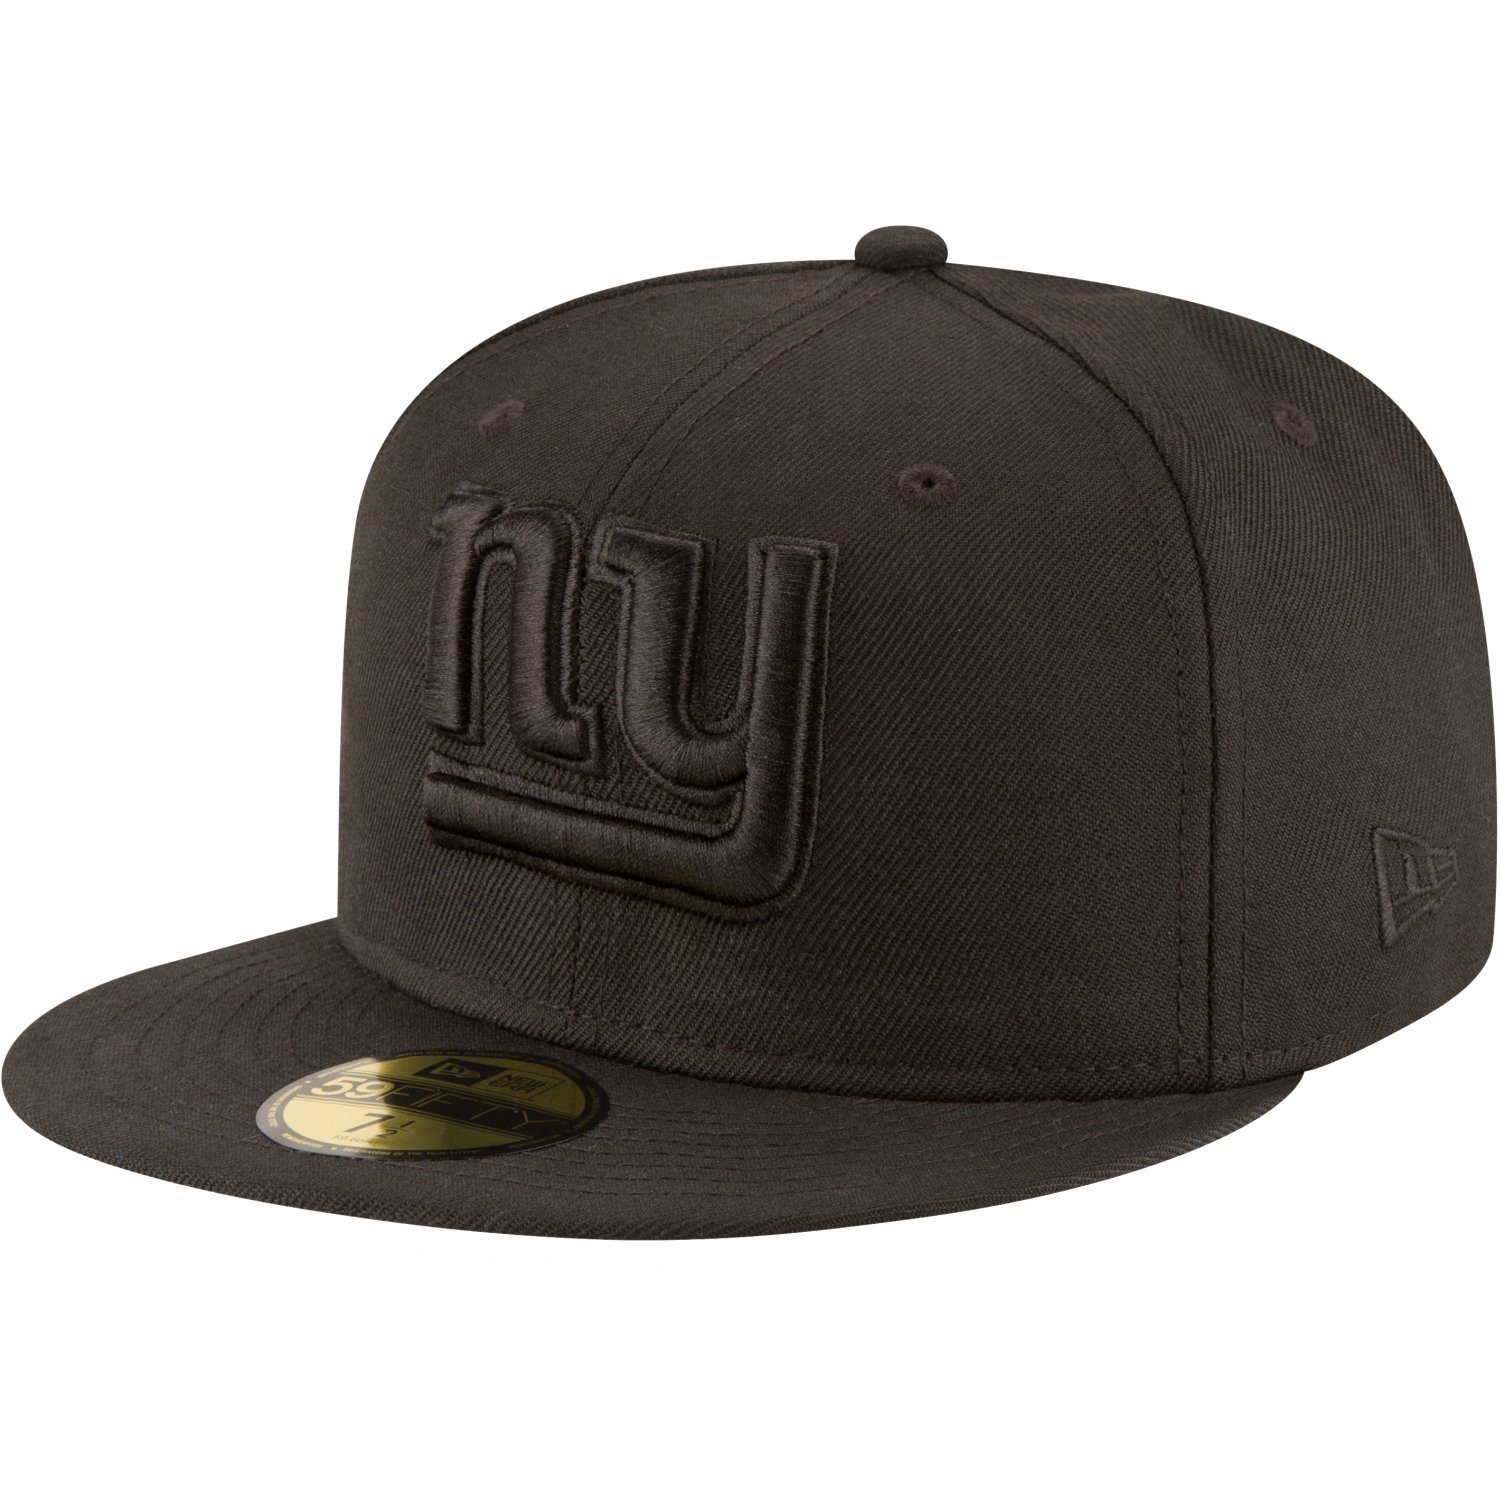 Era New Cap 59Fifty NFL Giants New Fitted York